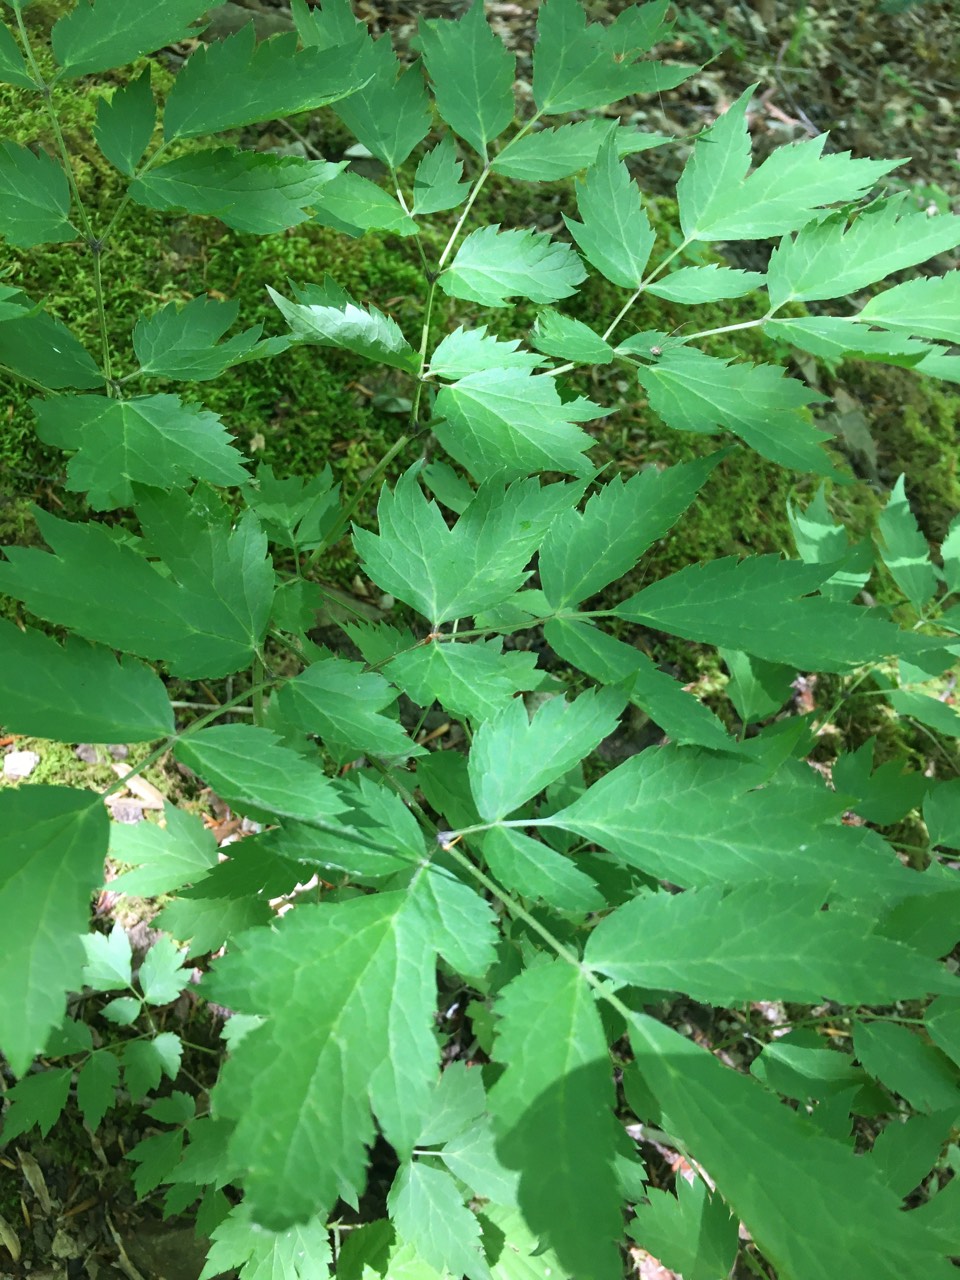 The Scientific Name is Xanthorhiza simplicissima. You will likely hear them called Brook-Feather, Yellowroot. This picture shows the Close-up of foliage in Spring with its compound leaves of lobed and strongly serrated leaflets. of Xanthorhiza simplicissima